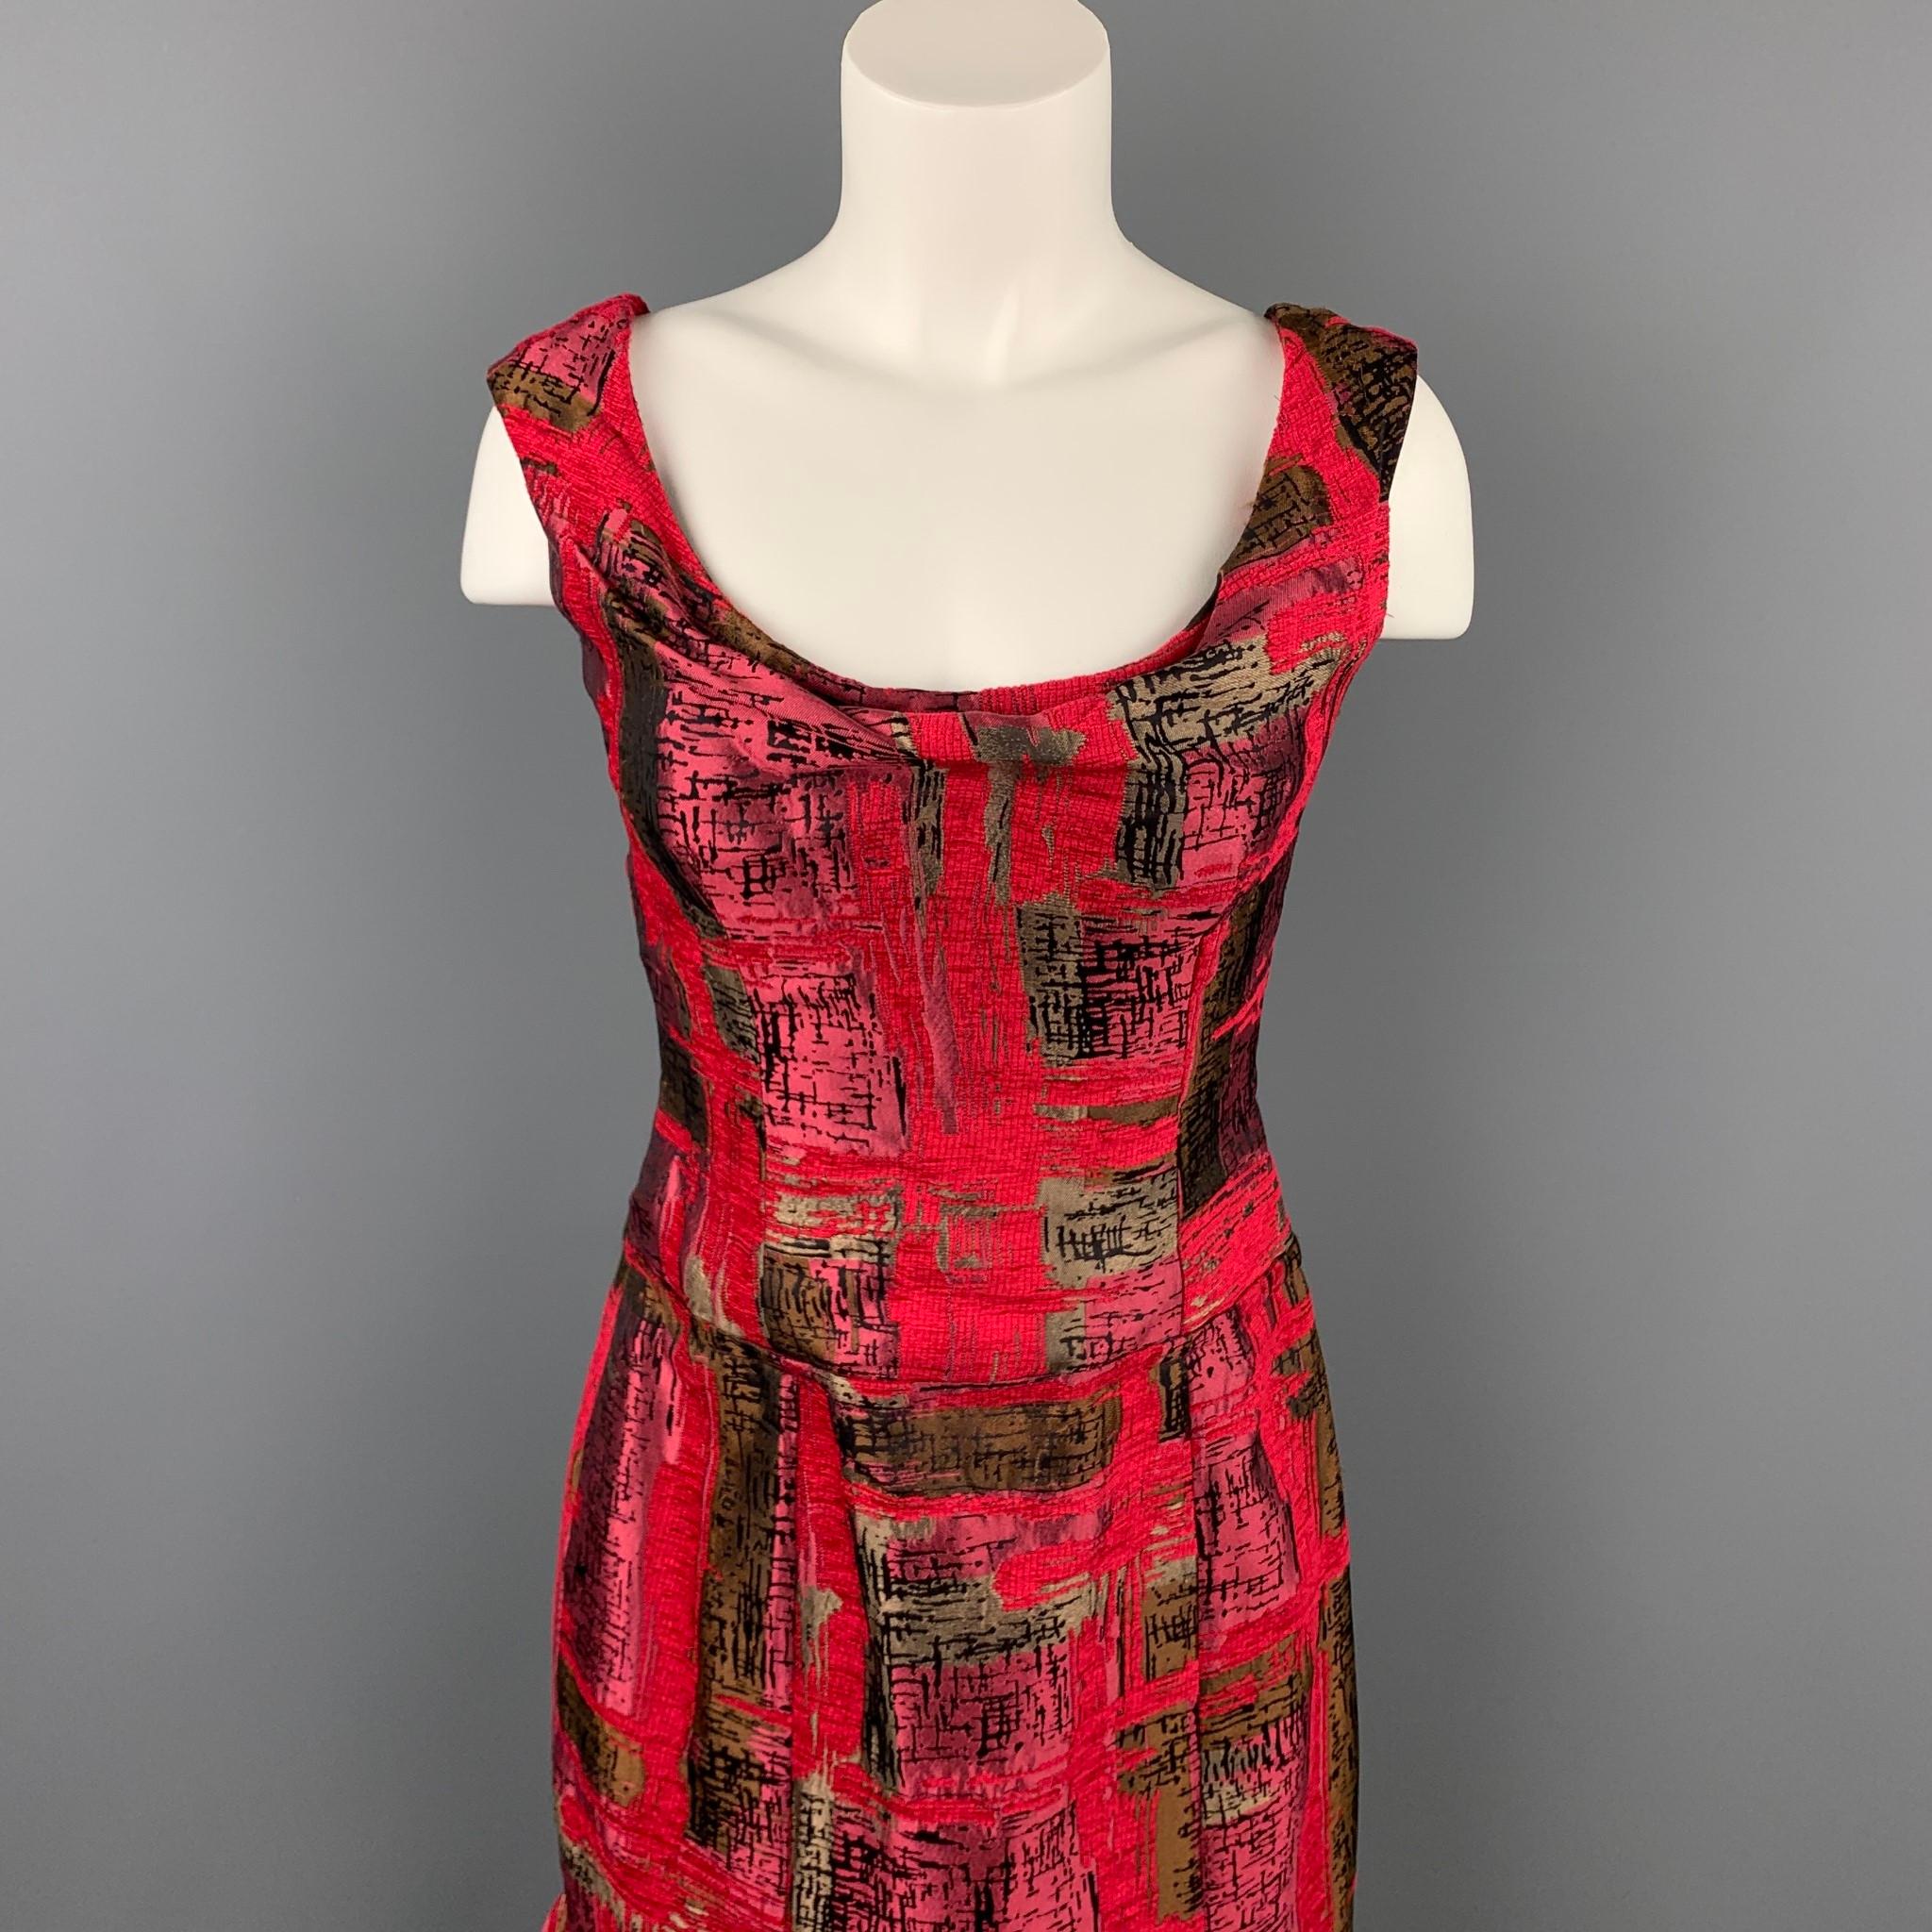 CAROLINA HERRERA cocktail dress comes in a red jacquard silk featuring a tulip style, ruffled skirt, and a back zip up closure. Made in USA.

Very Good Pre-Owned Condition.
Marked: 8

Measurements:

Bust: 30 in.
Waist: 30 in.
Hip: 38 in.
Length: 31